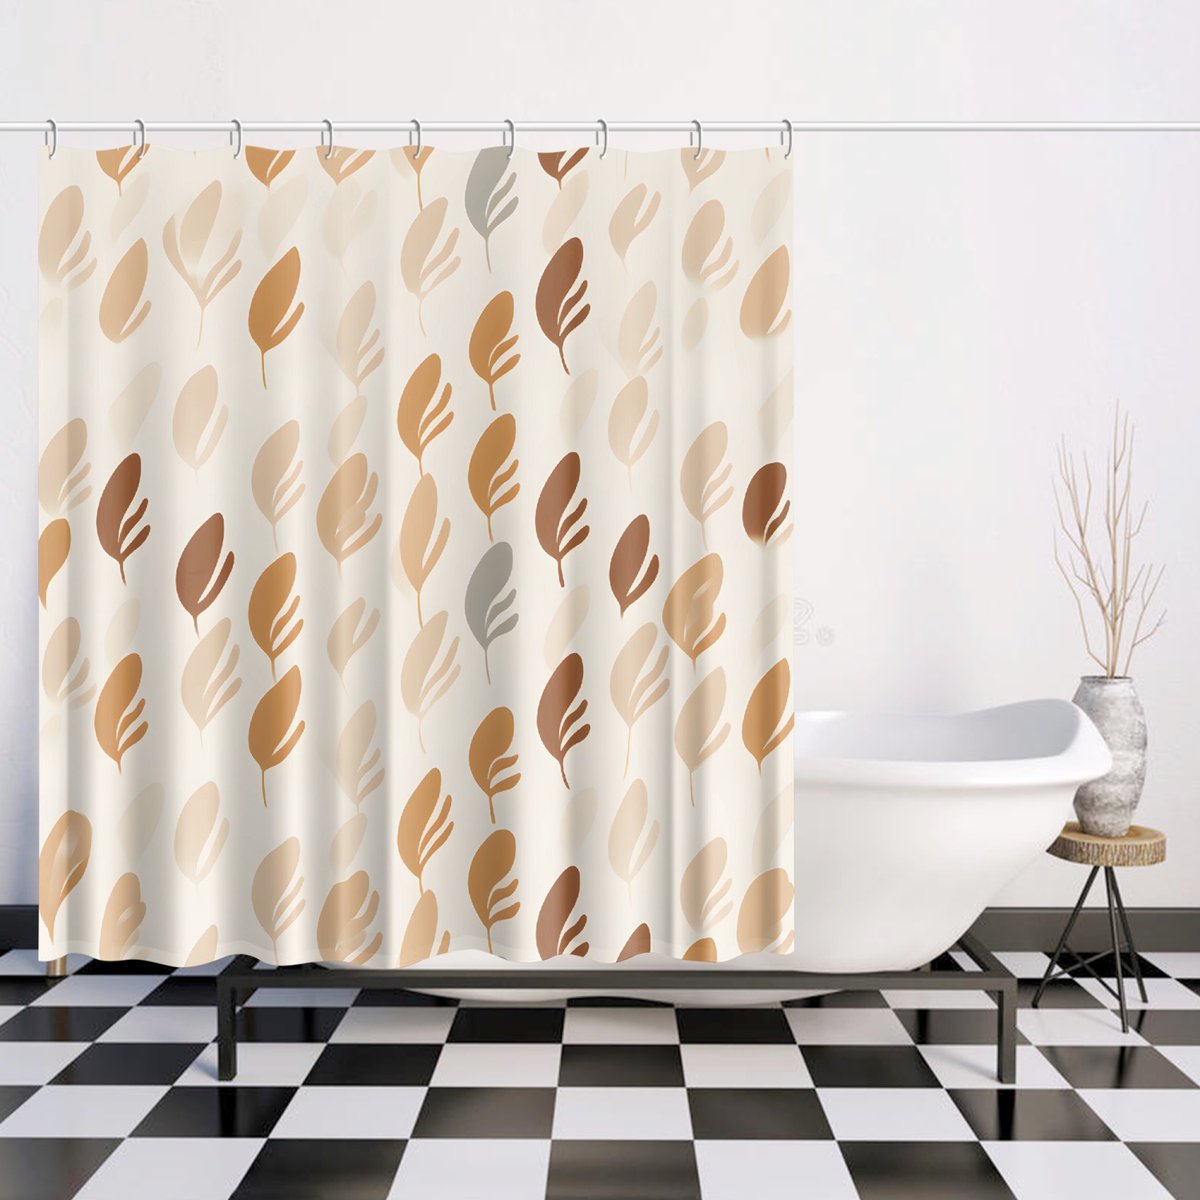 Unveil the charm of your shower space with our curated curtain picks.
Available only at: i.mtr.cool/amstngifbf 
#showercurtain #showercutains #sale #unique #bathdecor #homedecor #moderndecor #boho #gift #housewarming #homeinspo #showerdesign #quality